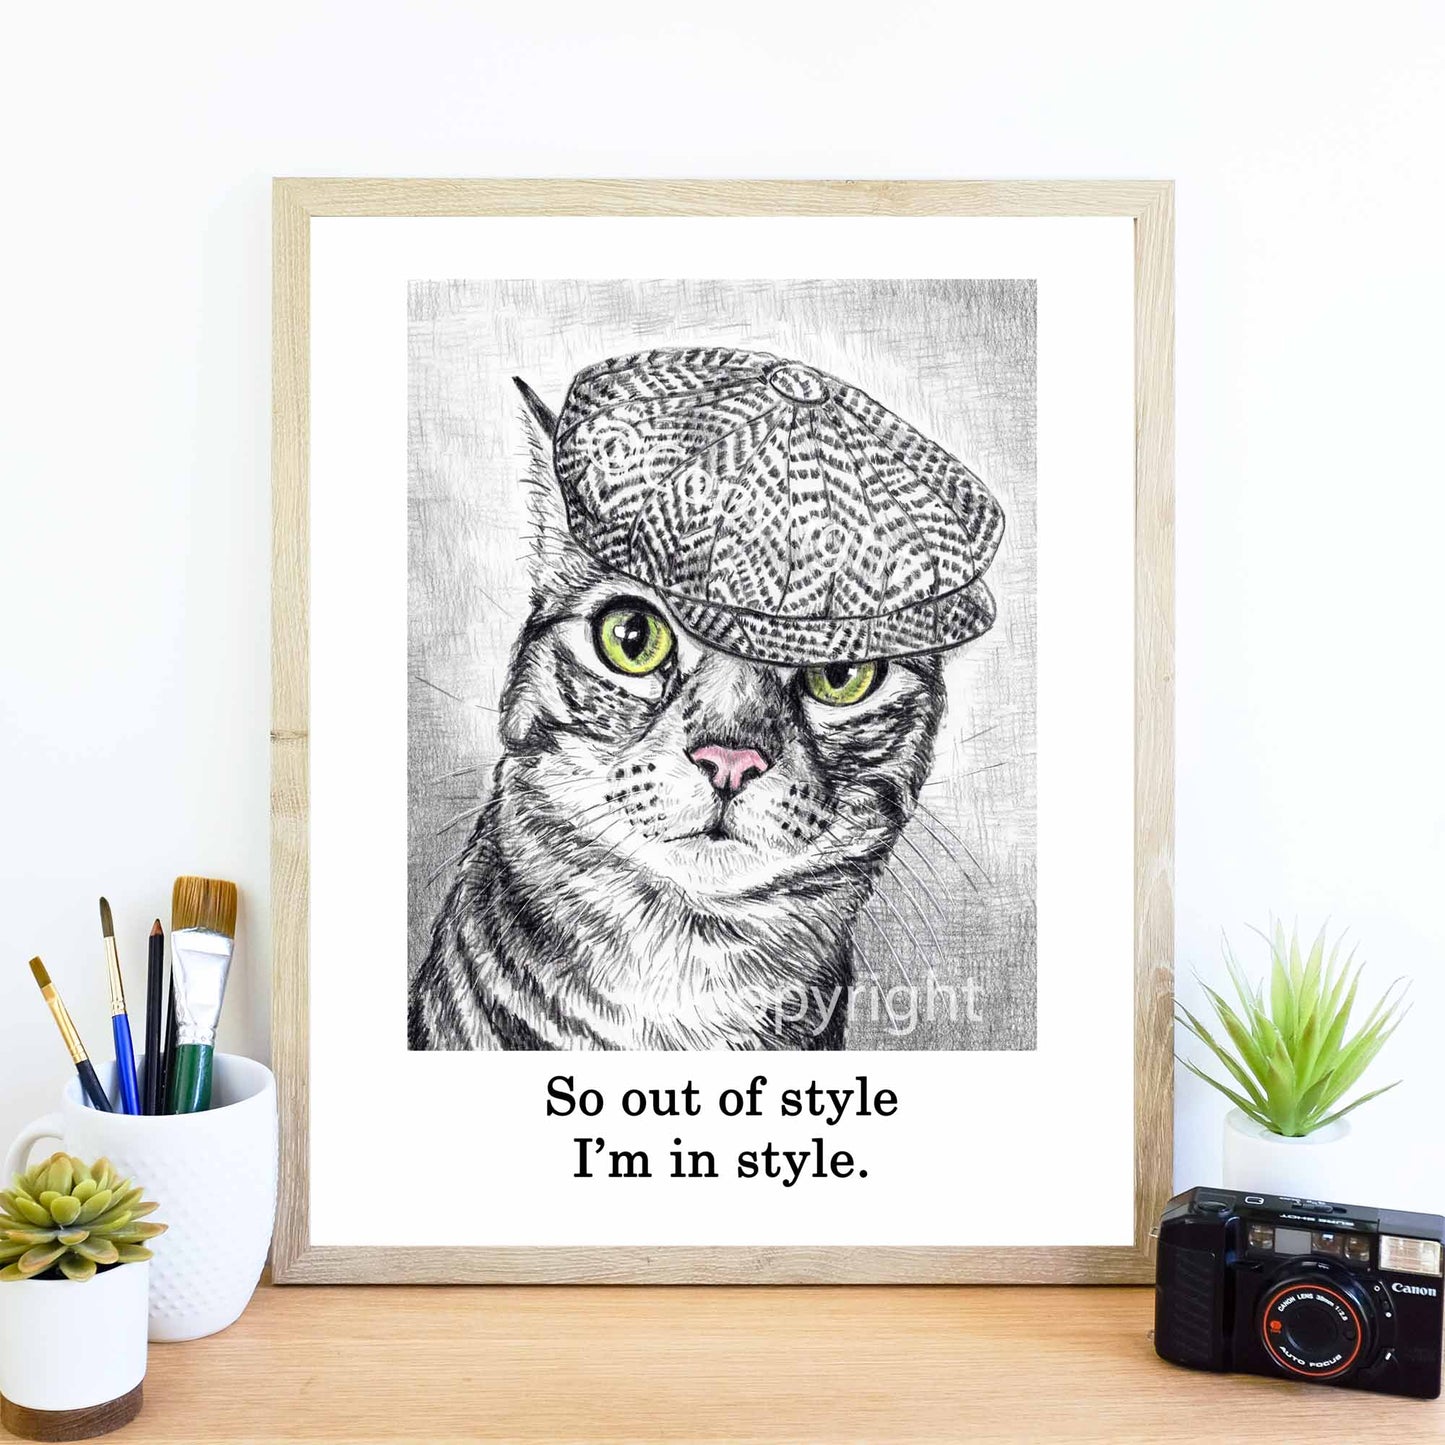 Vintage-inspired crayon drawing of a tabby cat wearing a newsboy cap by Deidre Wicks